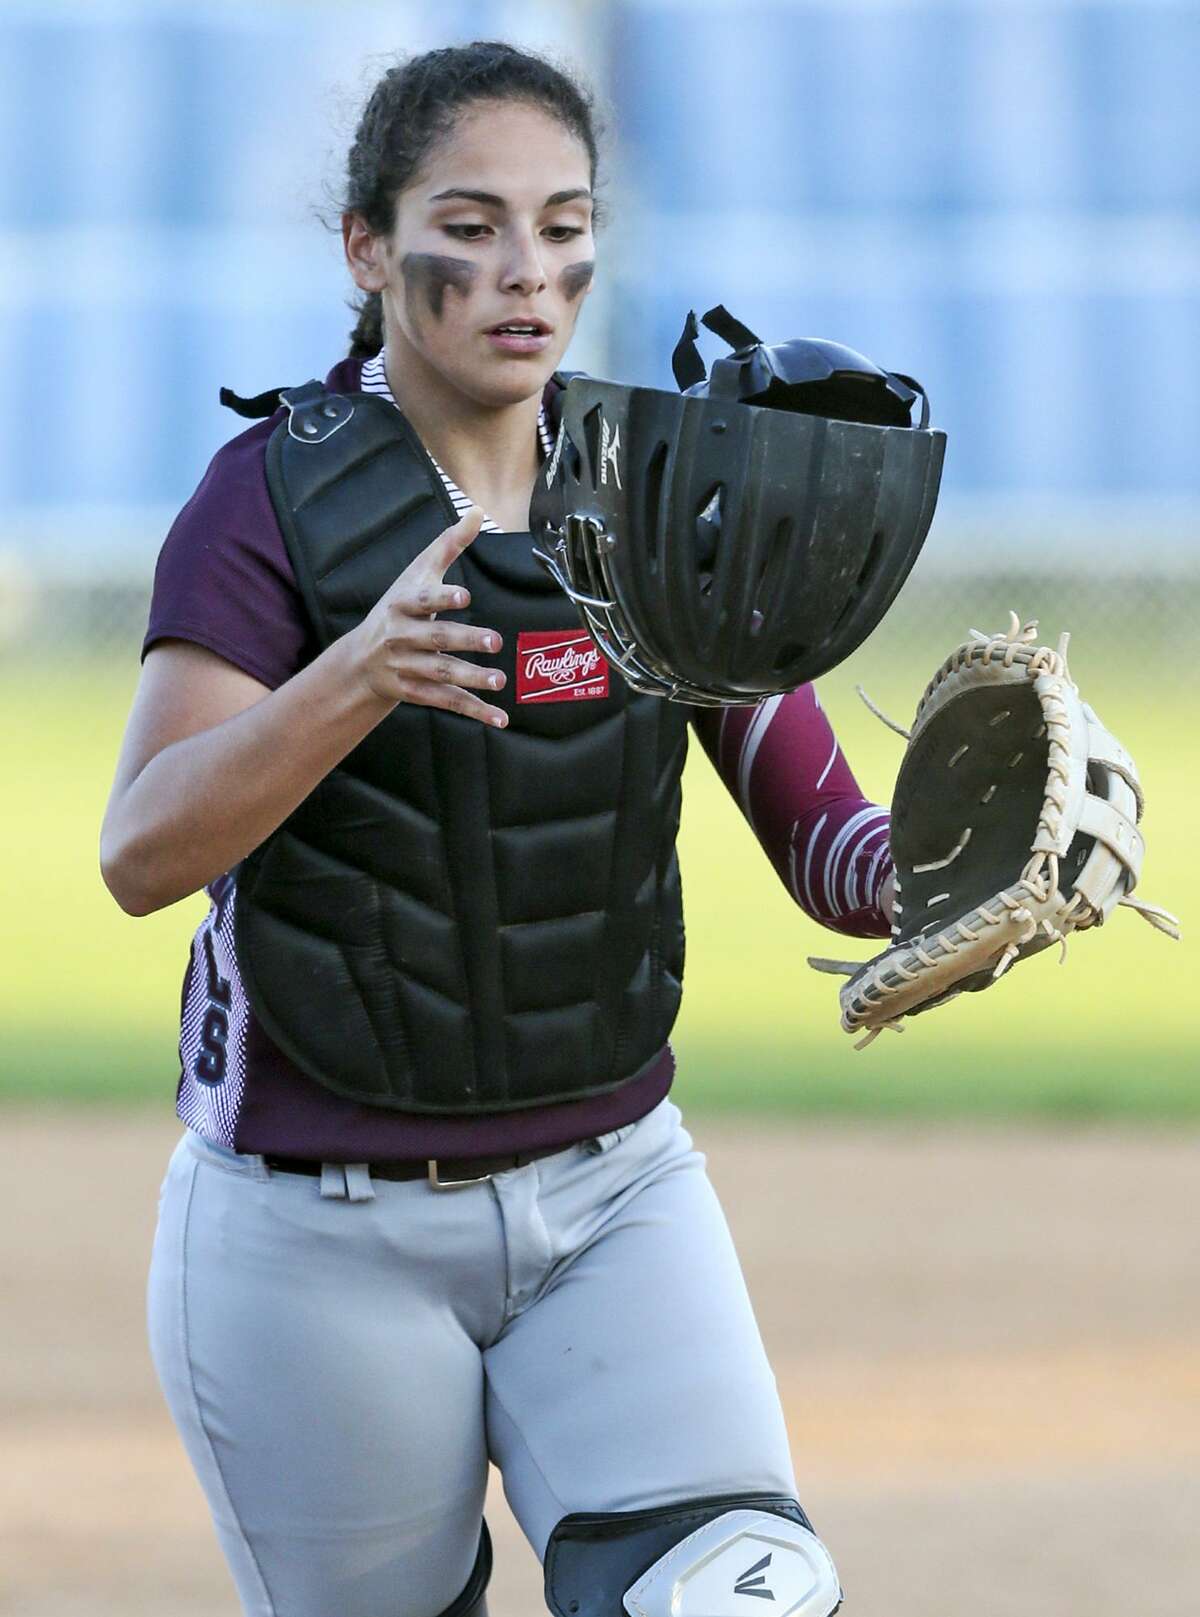 Highlands catcher Alyssa Flores comes off the field during a District 28-5A game with Brackenridge at the Mary Ann Villarreal Sports Complex on March 22, 2016.